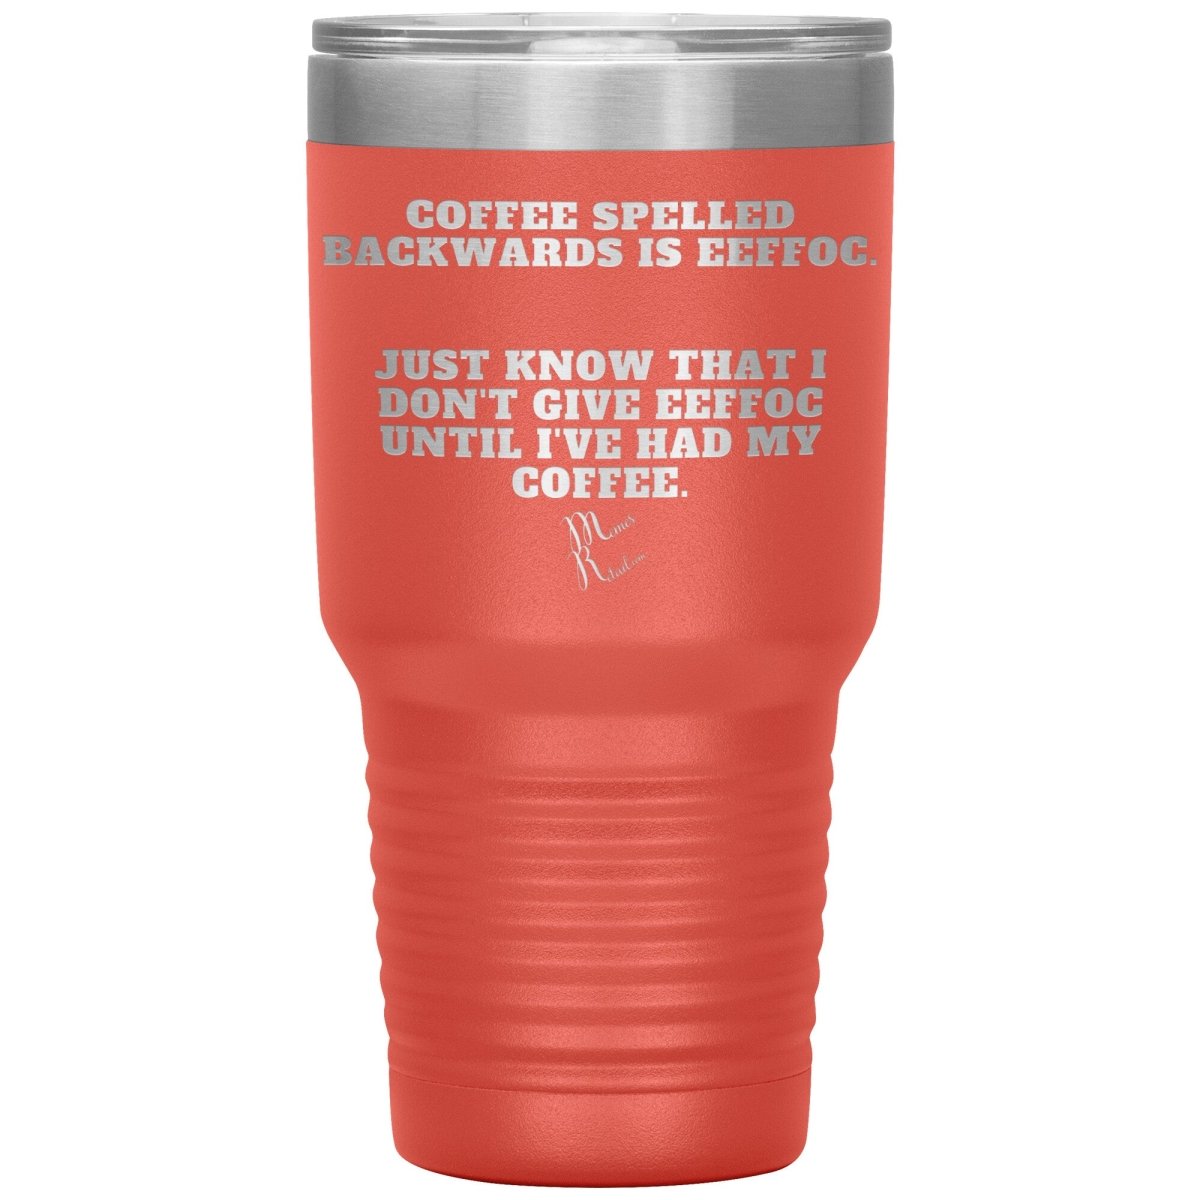 Coffee spelled backwards is eeffoc Tumblers, 30oz Insulated Tumbler / Coral - MemesRetail.com